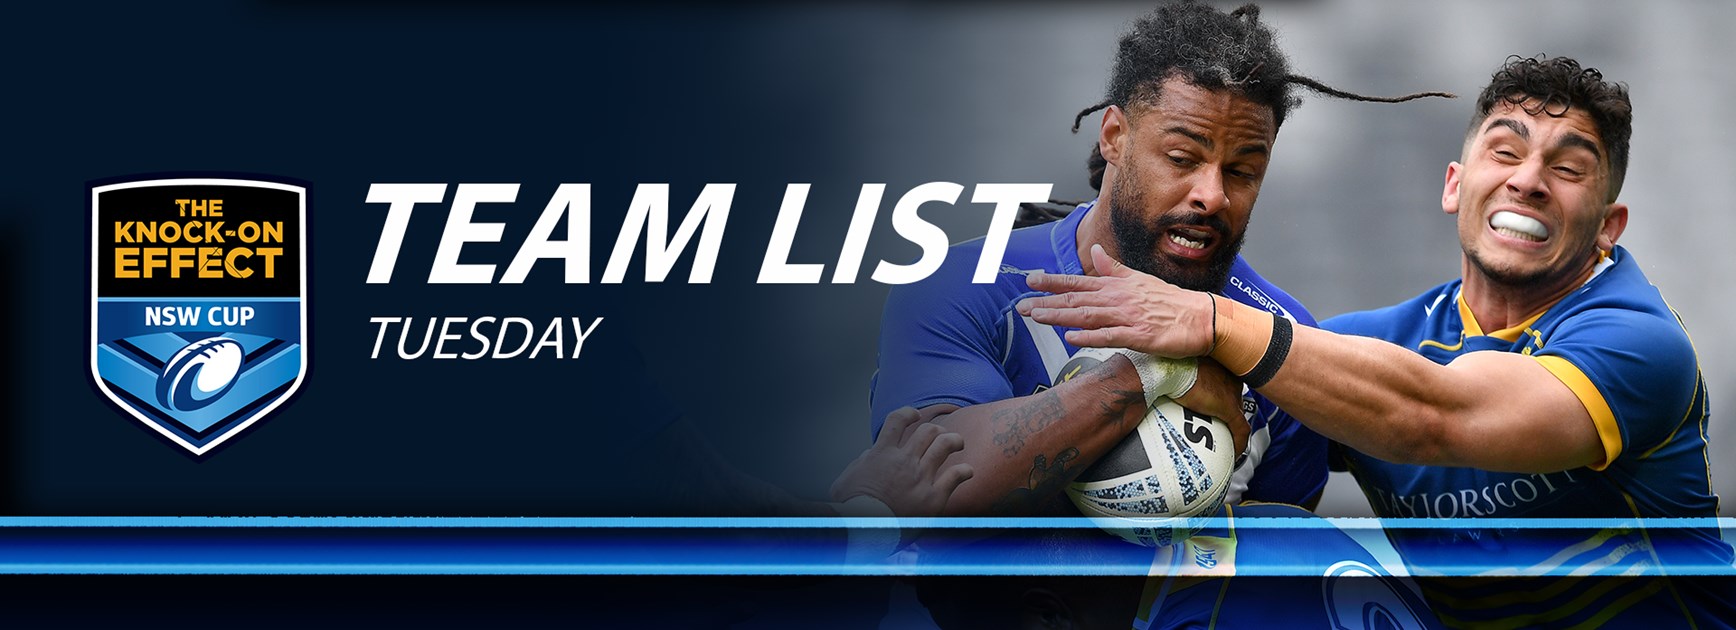 Team List Tuesday | The Knock-On Effect NSW Cup Round 24